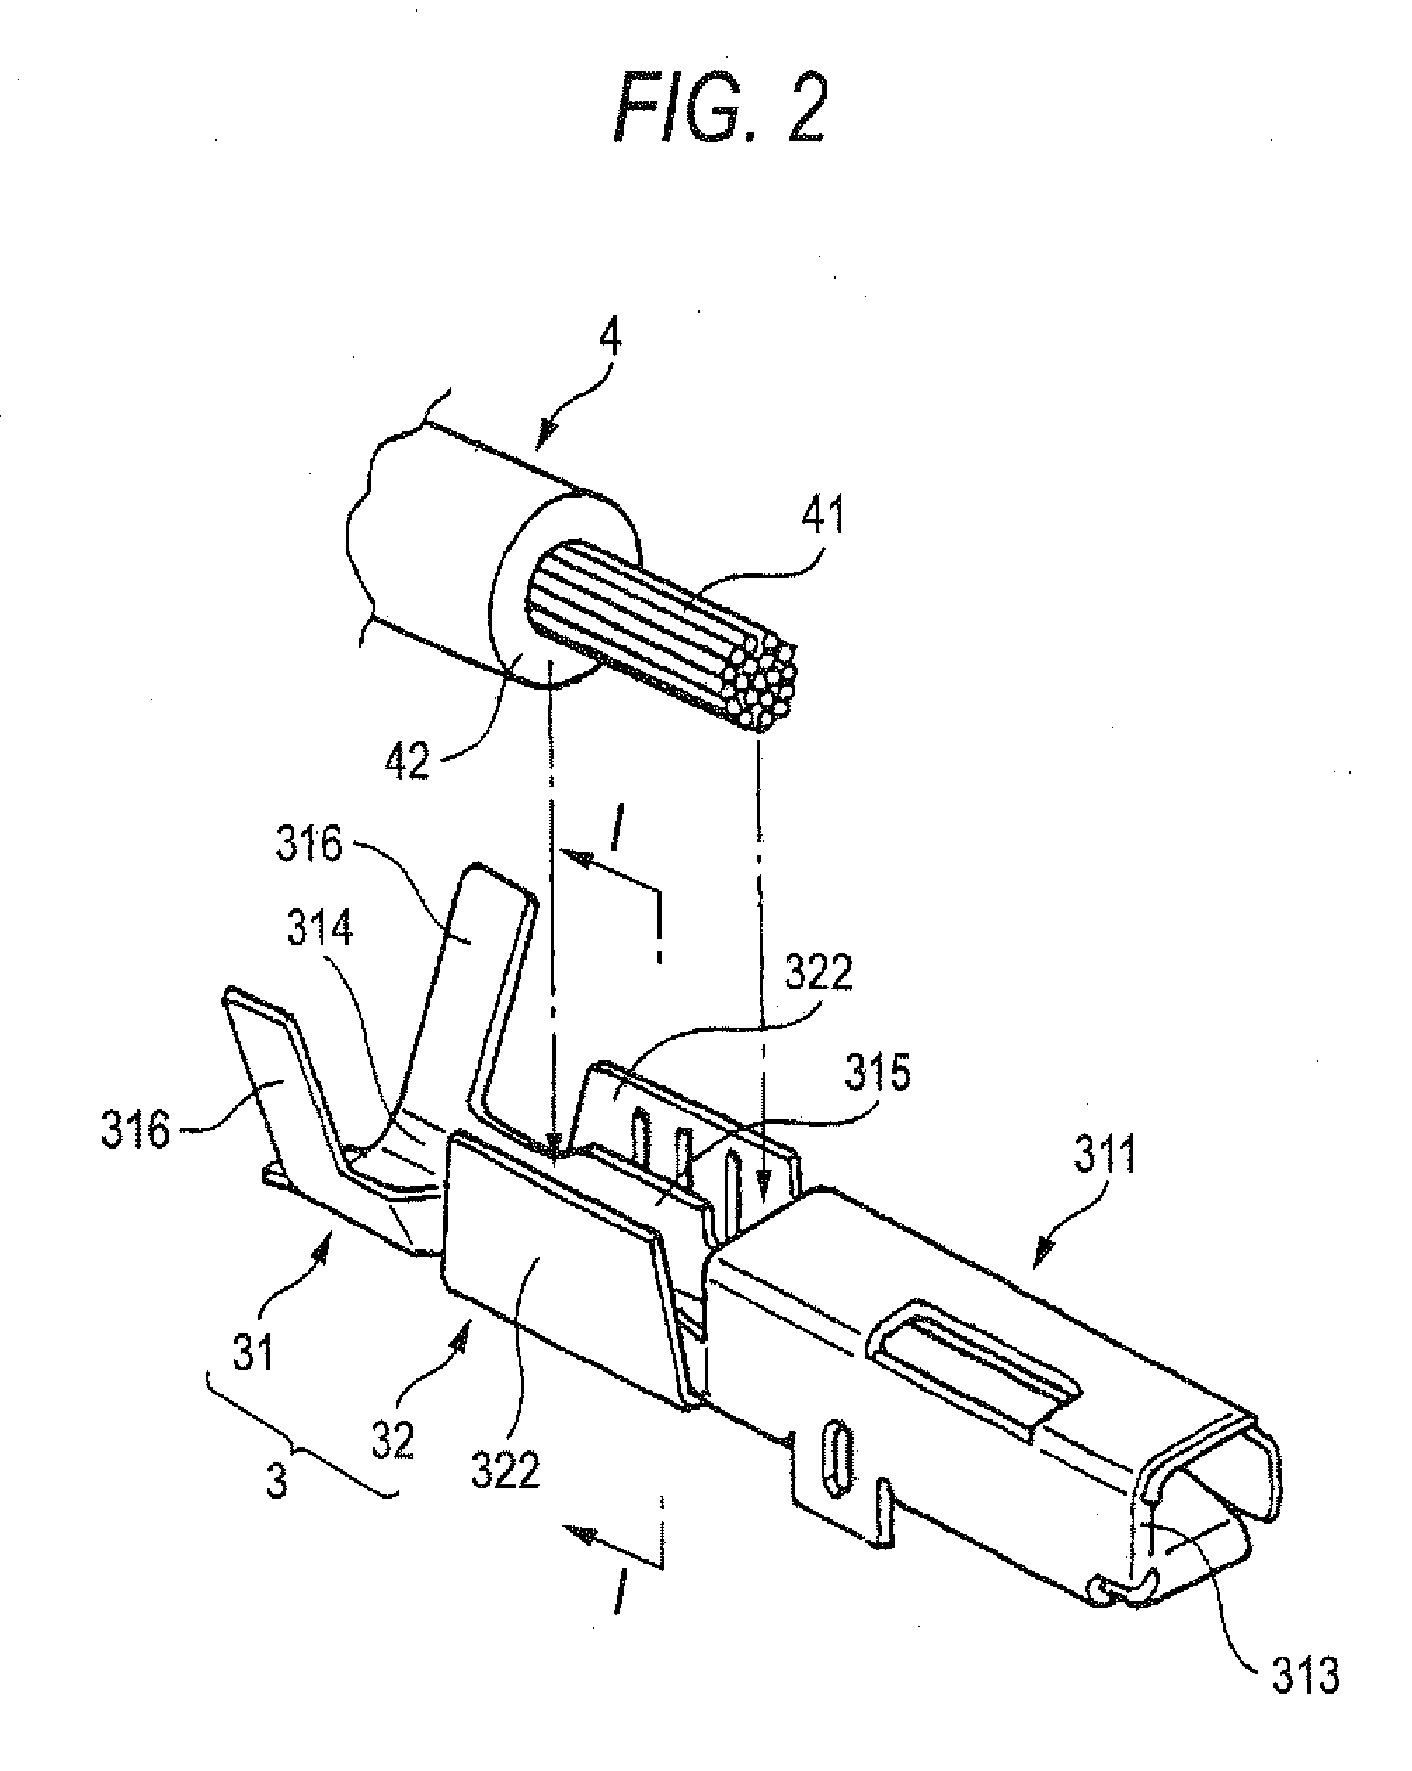 Terminal fitting and mounting method